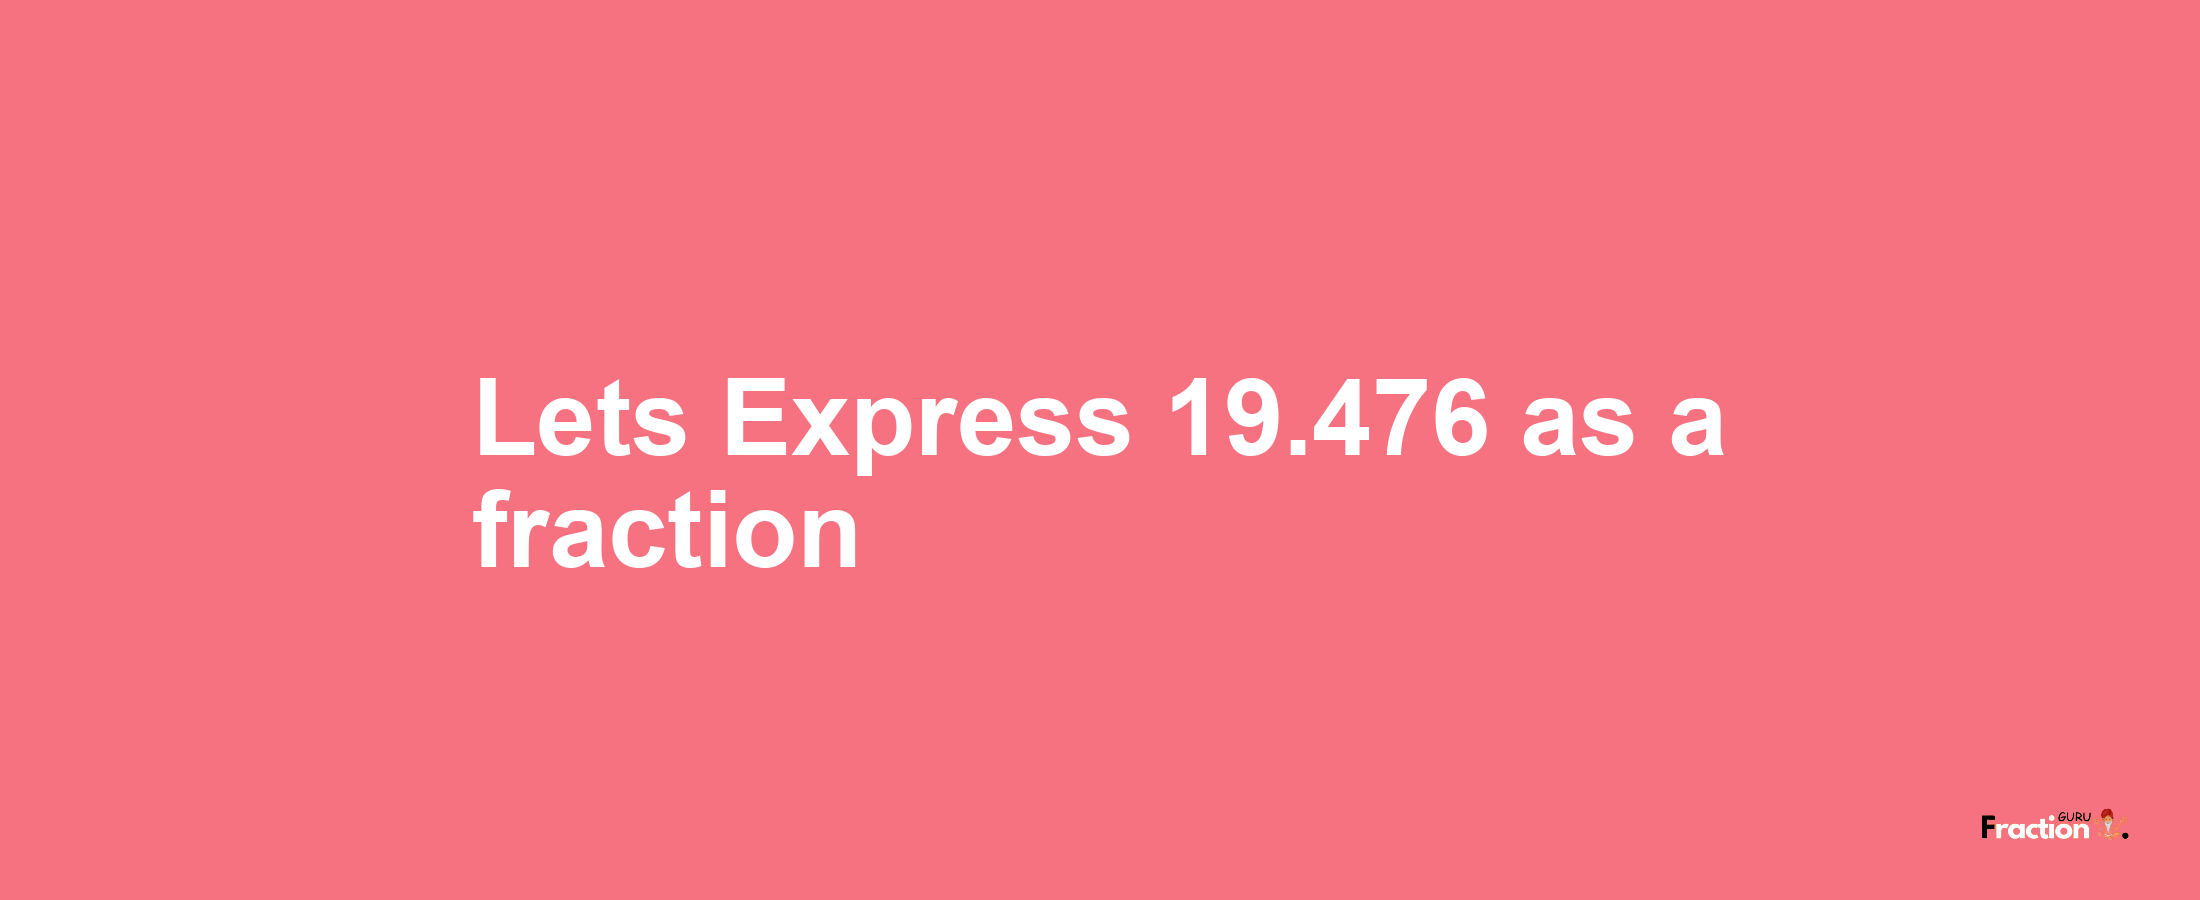 Lets Express 19.476 as afraction